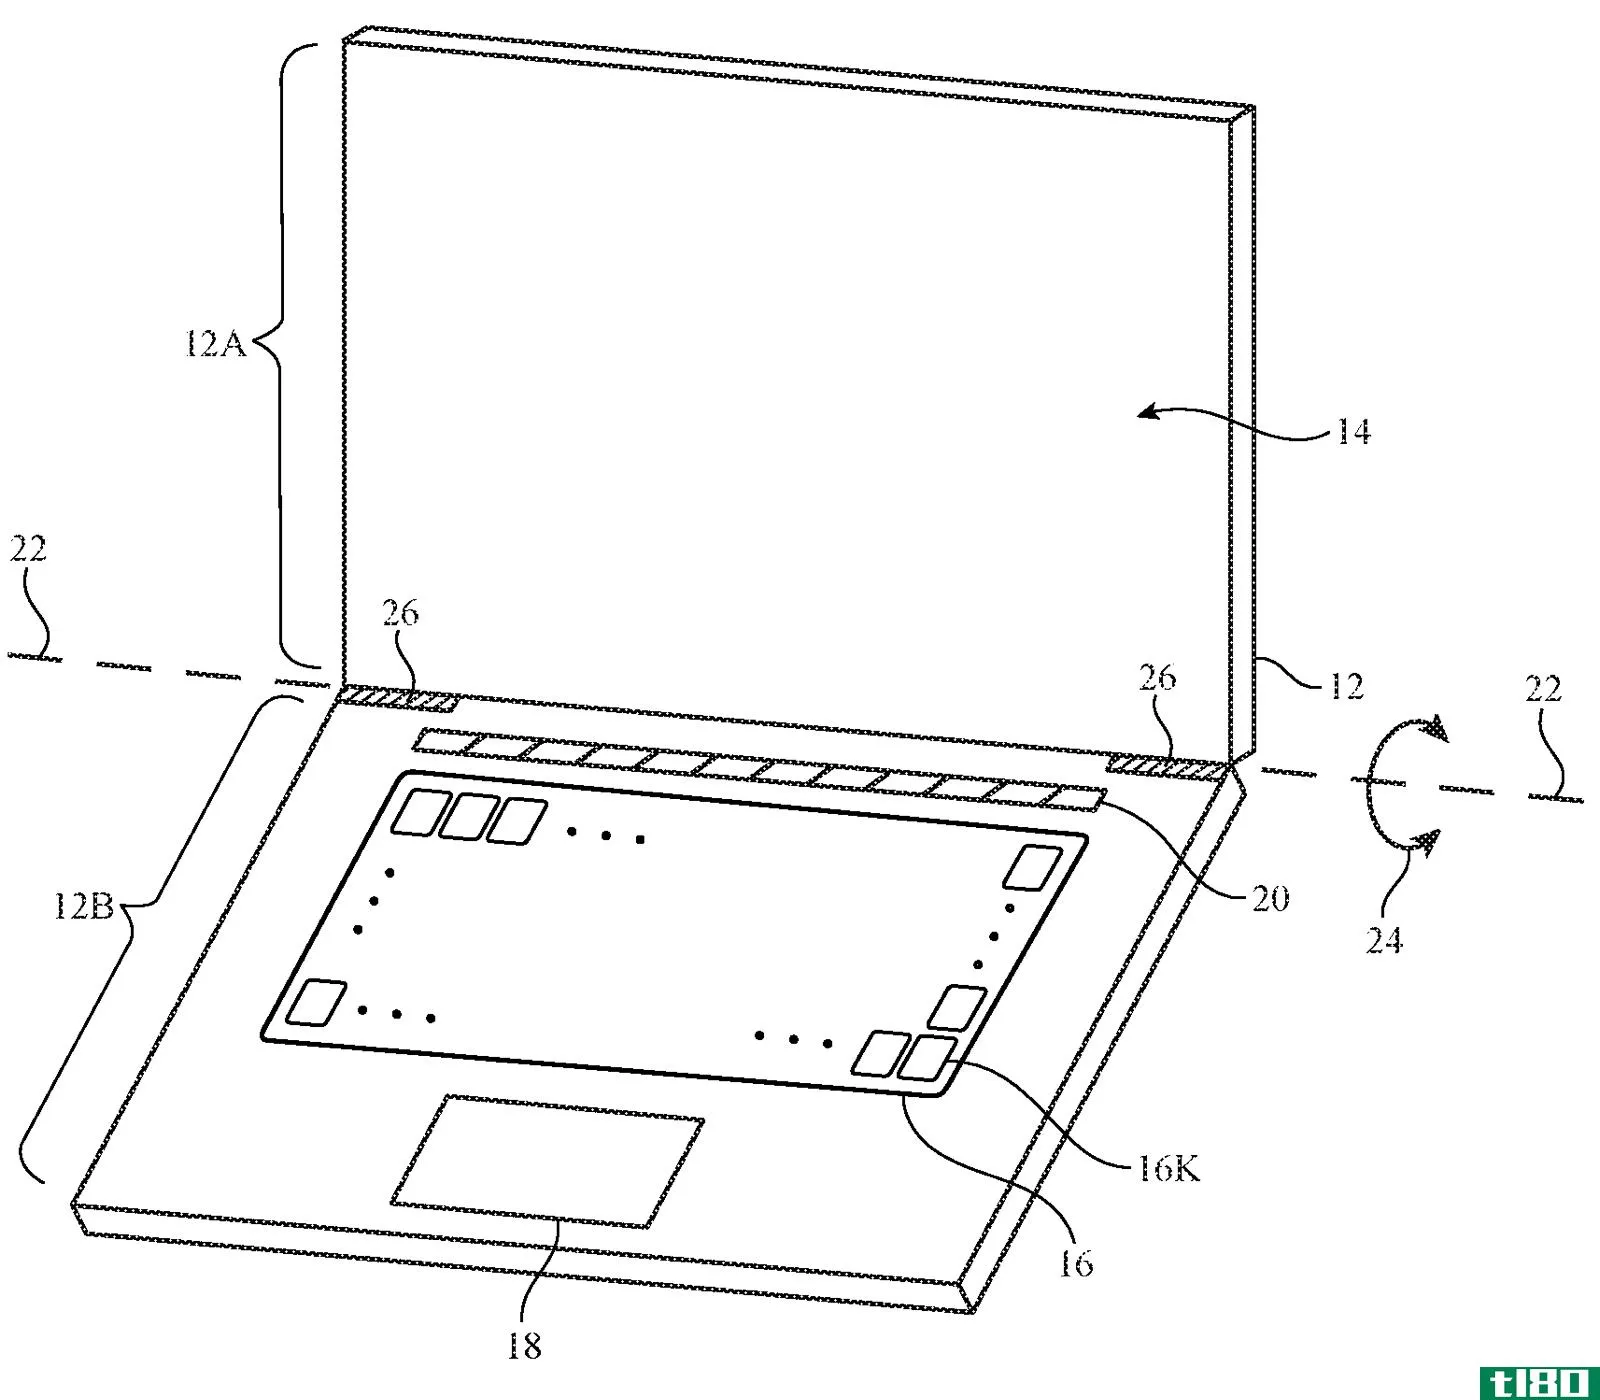 An illustration accompanying Apple's patent for Electronic devices having keys with coherent fiber bundles that shows a reconfigurable notebook keyboard